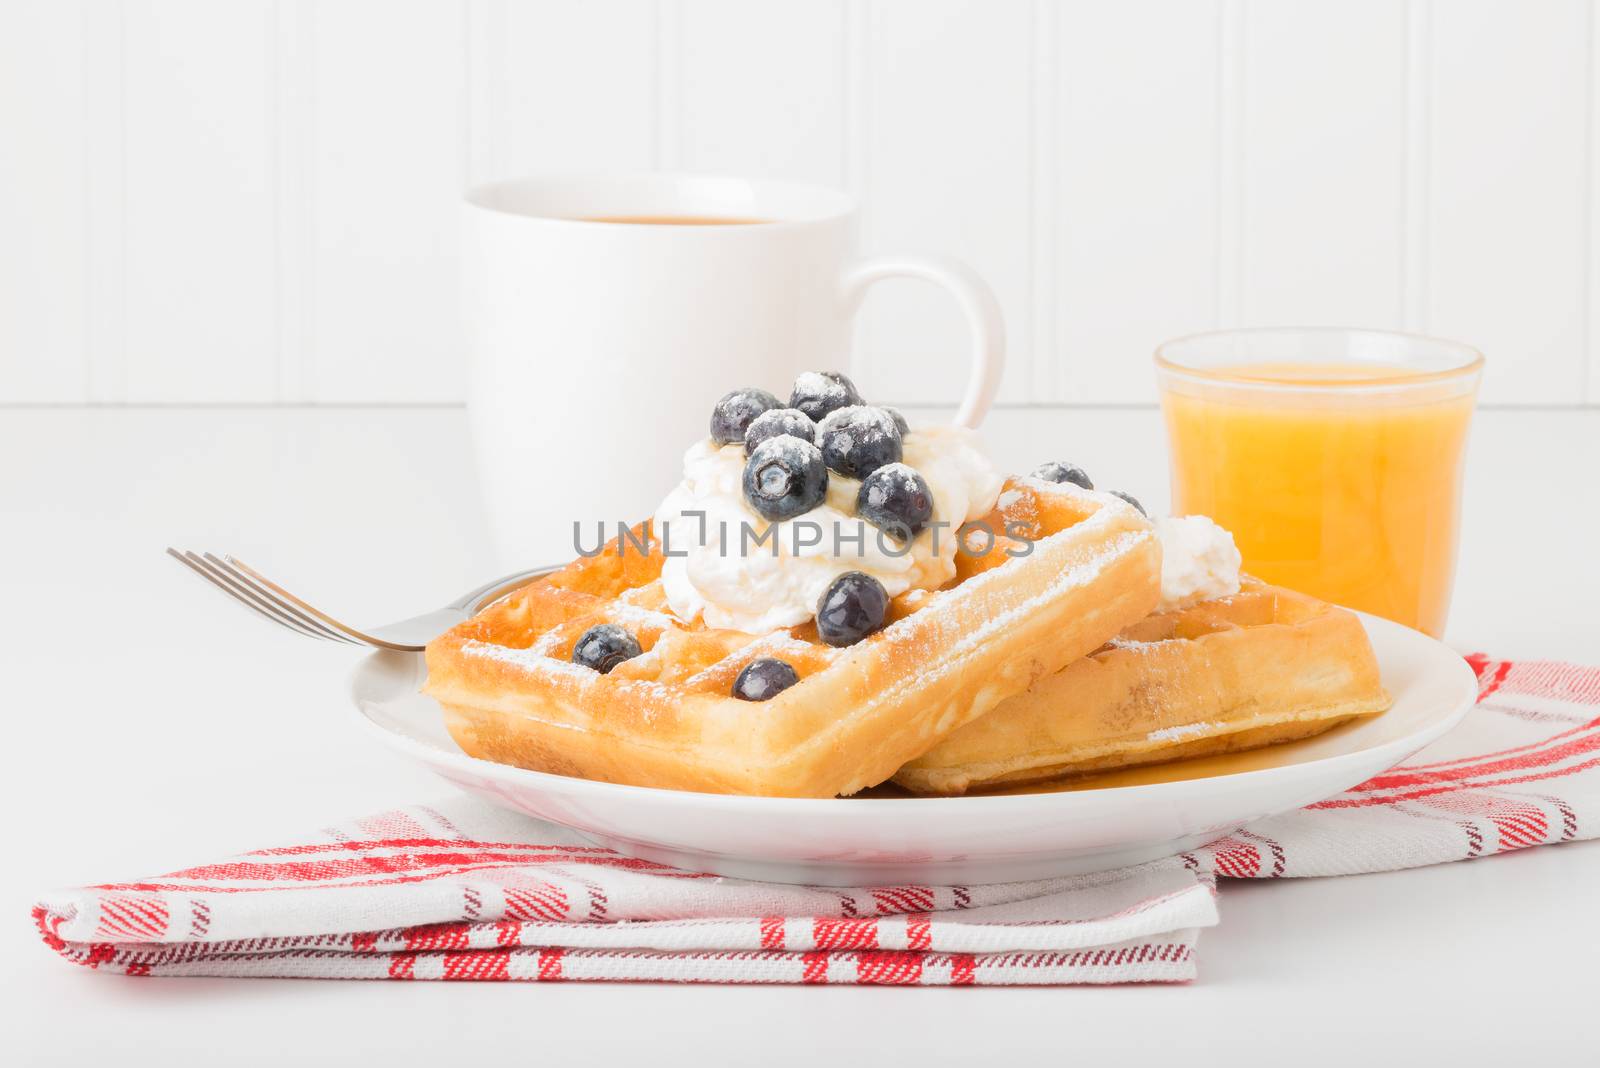 Waffles and Blueberries by billberryphotography